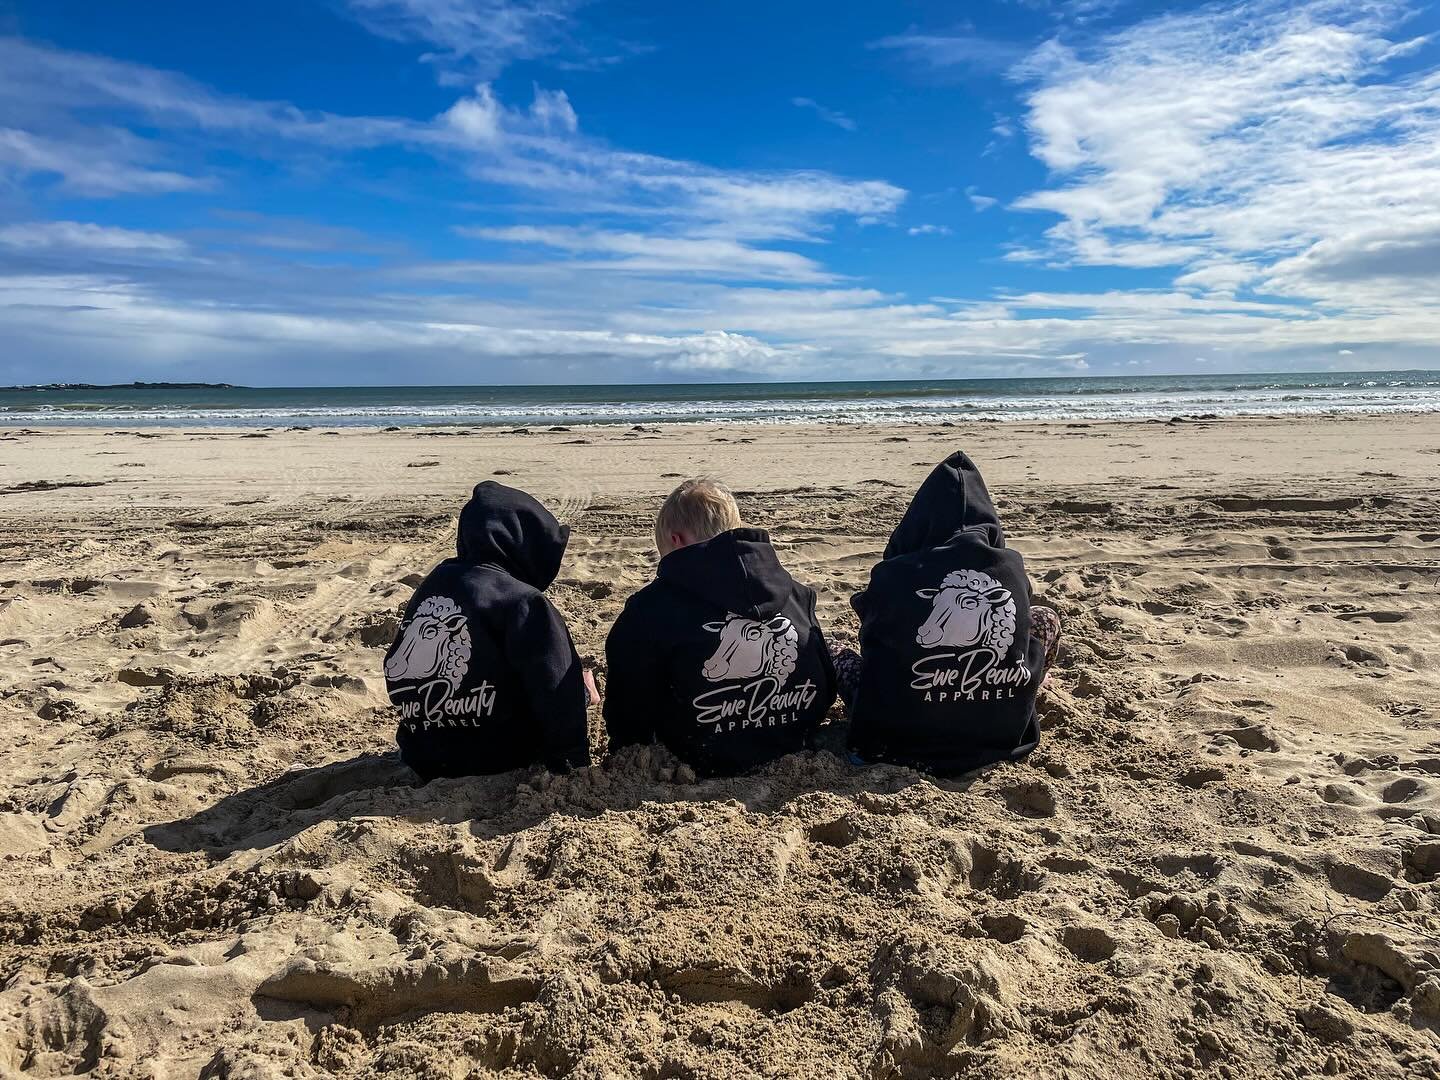 Shearing hoodies can be worn absolutely anywhere&hellip; Even on beach days 🌊

Kids &amp; Adults sizes available.

🛒 Link in bio or at www.ewebeauty.com.au 

#autumnvibes🍁 #beach #familytime #countryclothing #shearinghoodie #hoodies #hoodieseason 